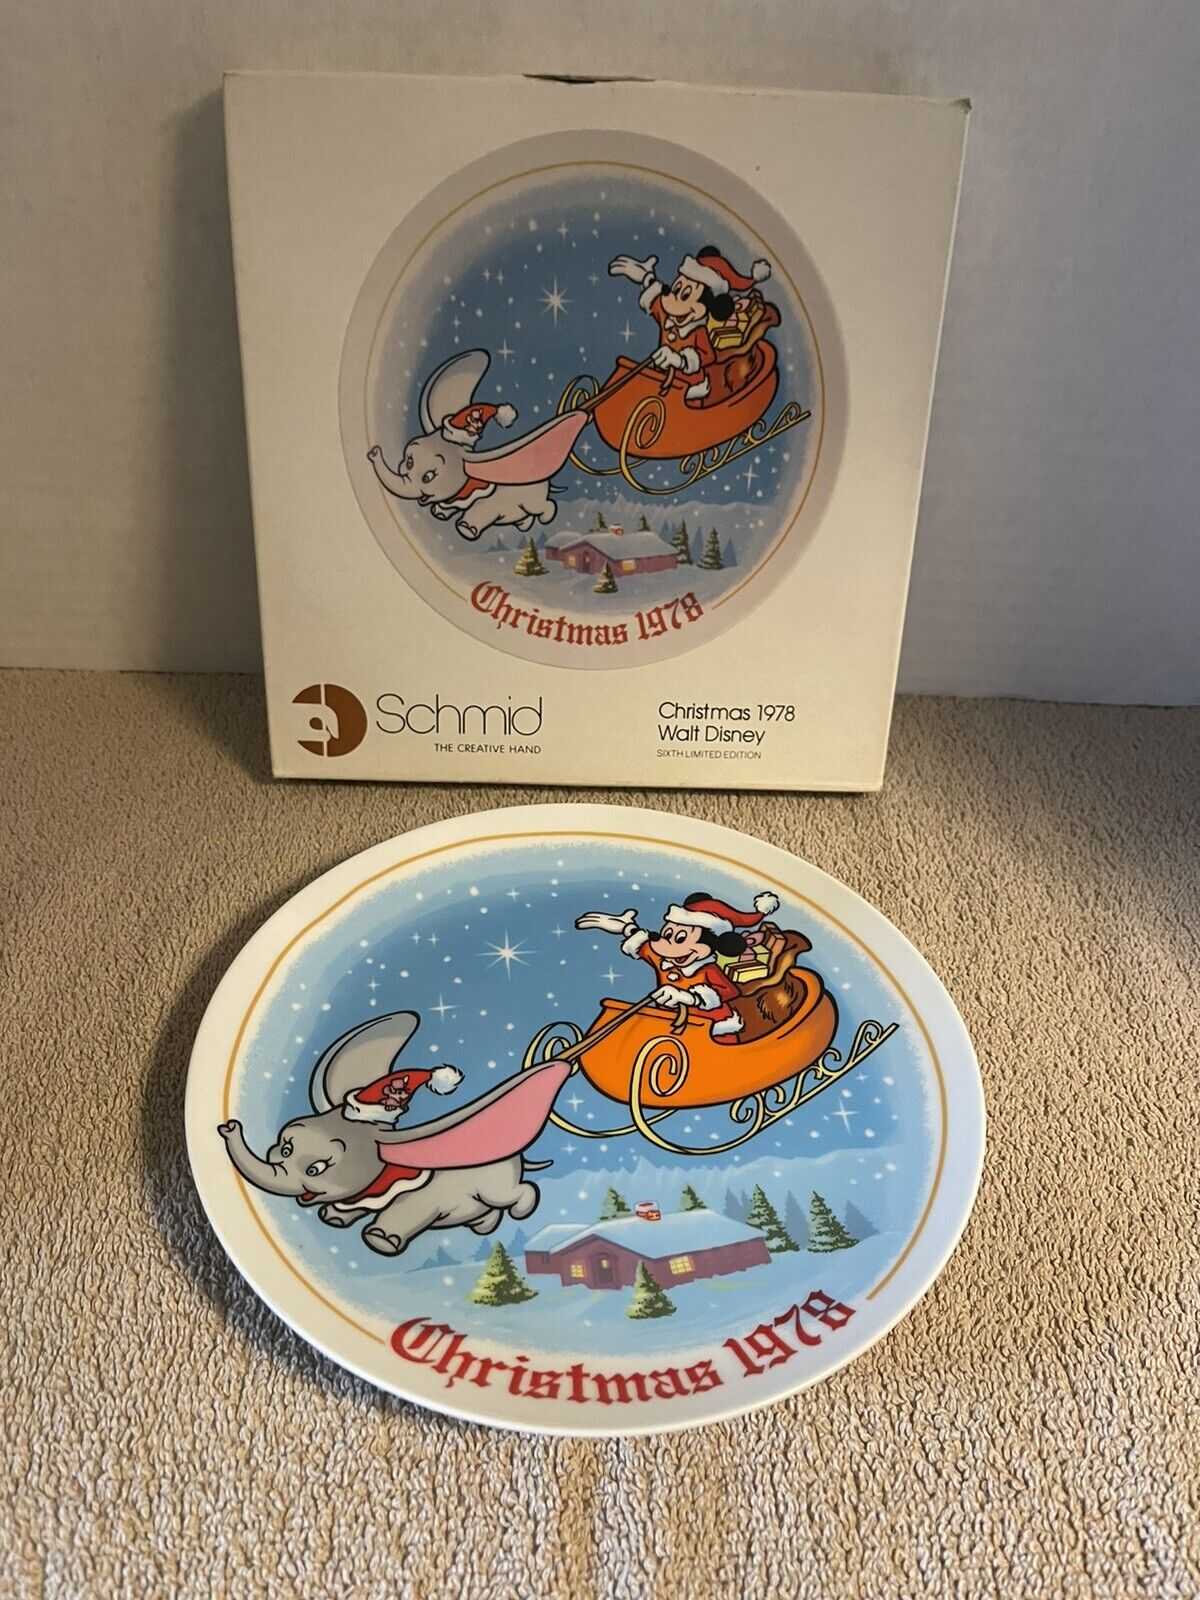 Schmid 1978 Christmas Disney Collectors Decorative Plate - Mickey Mouse Dumbo